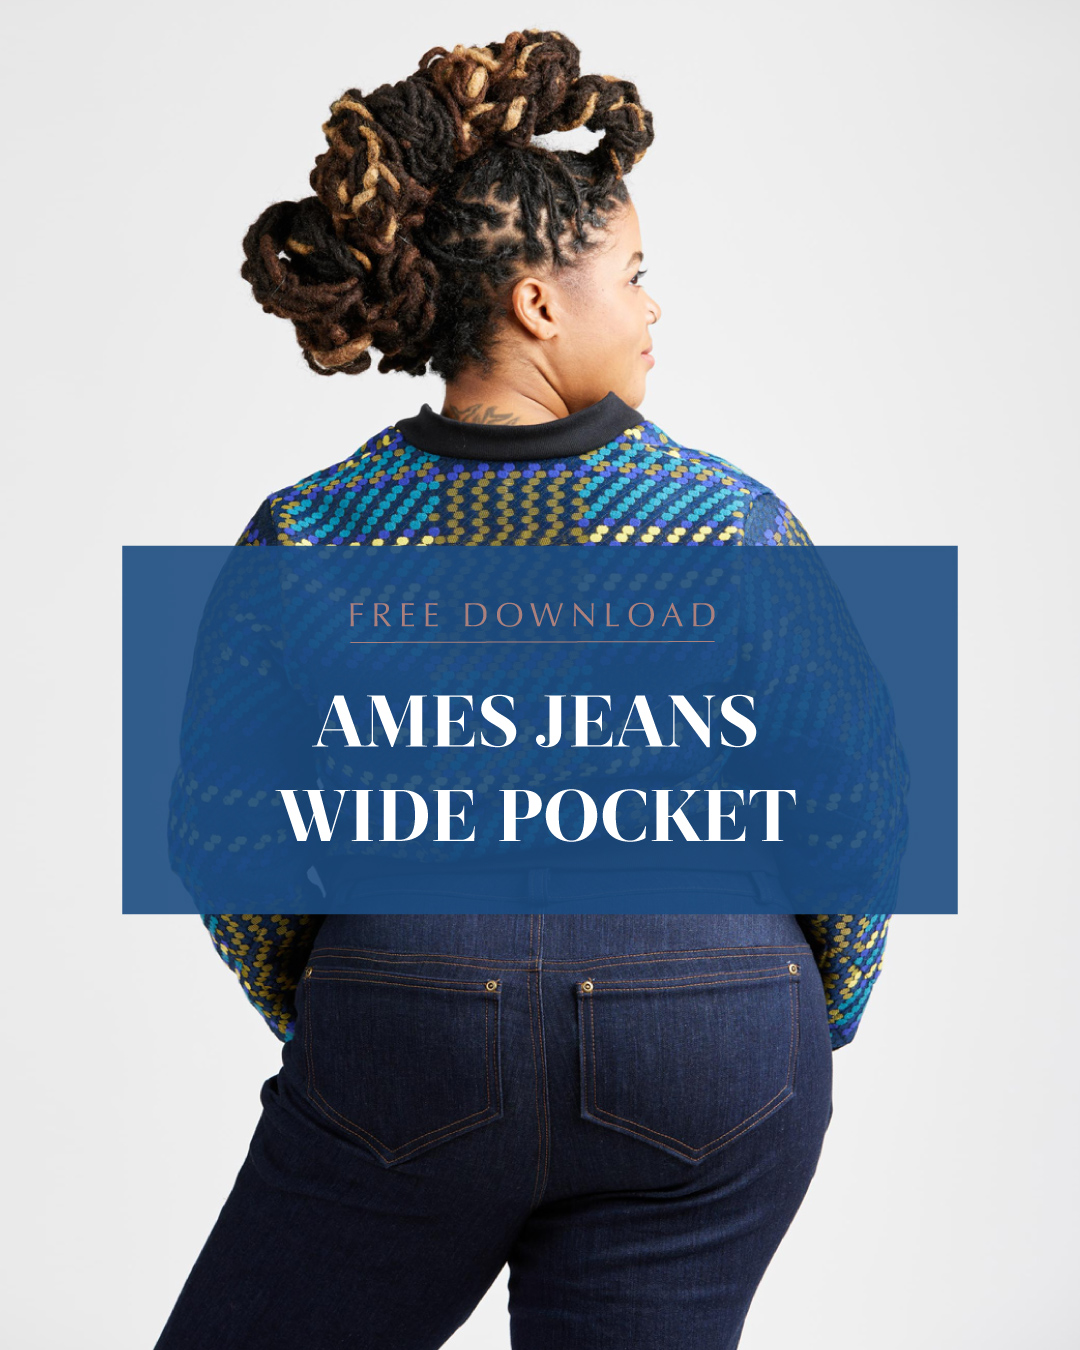 Free download: a new wide pocket for the Ames Jeans! | Cashmerette